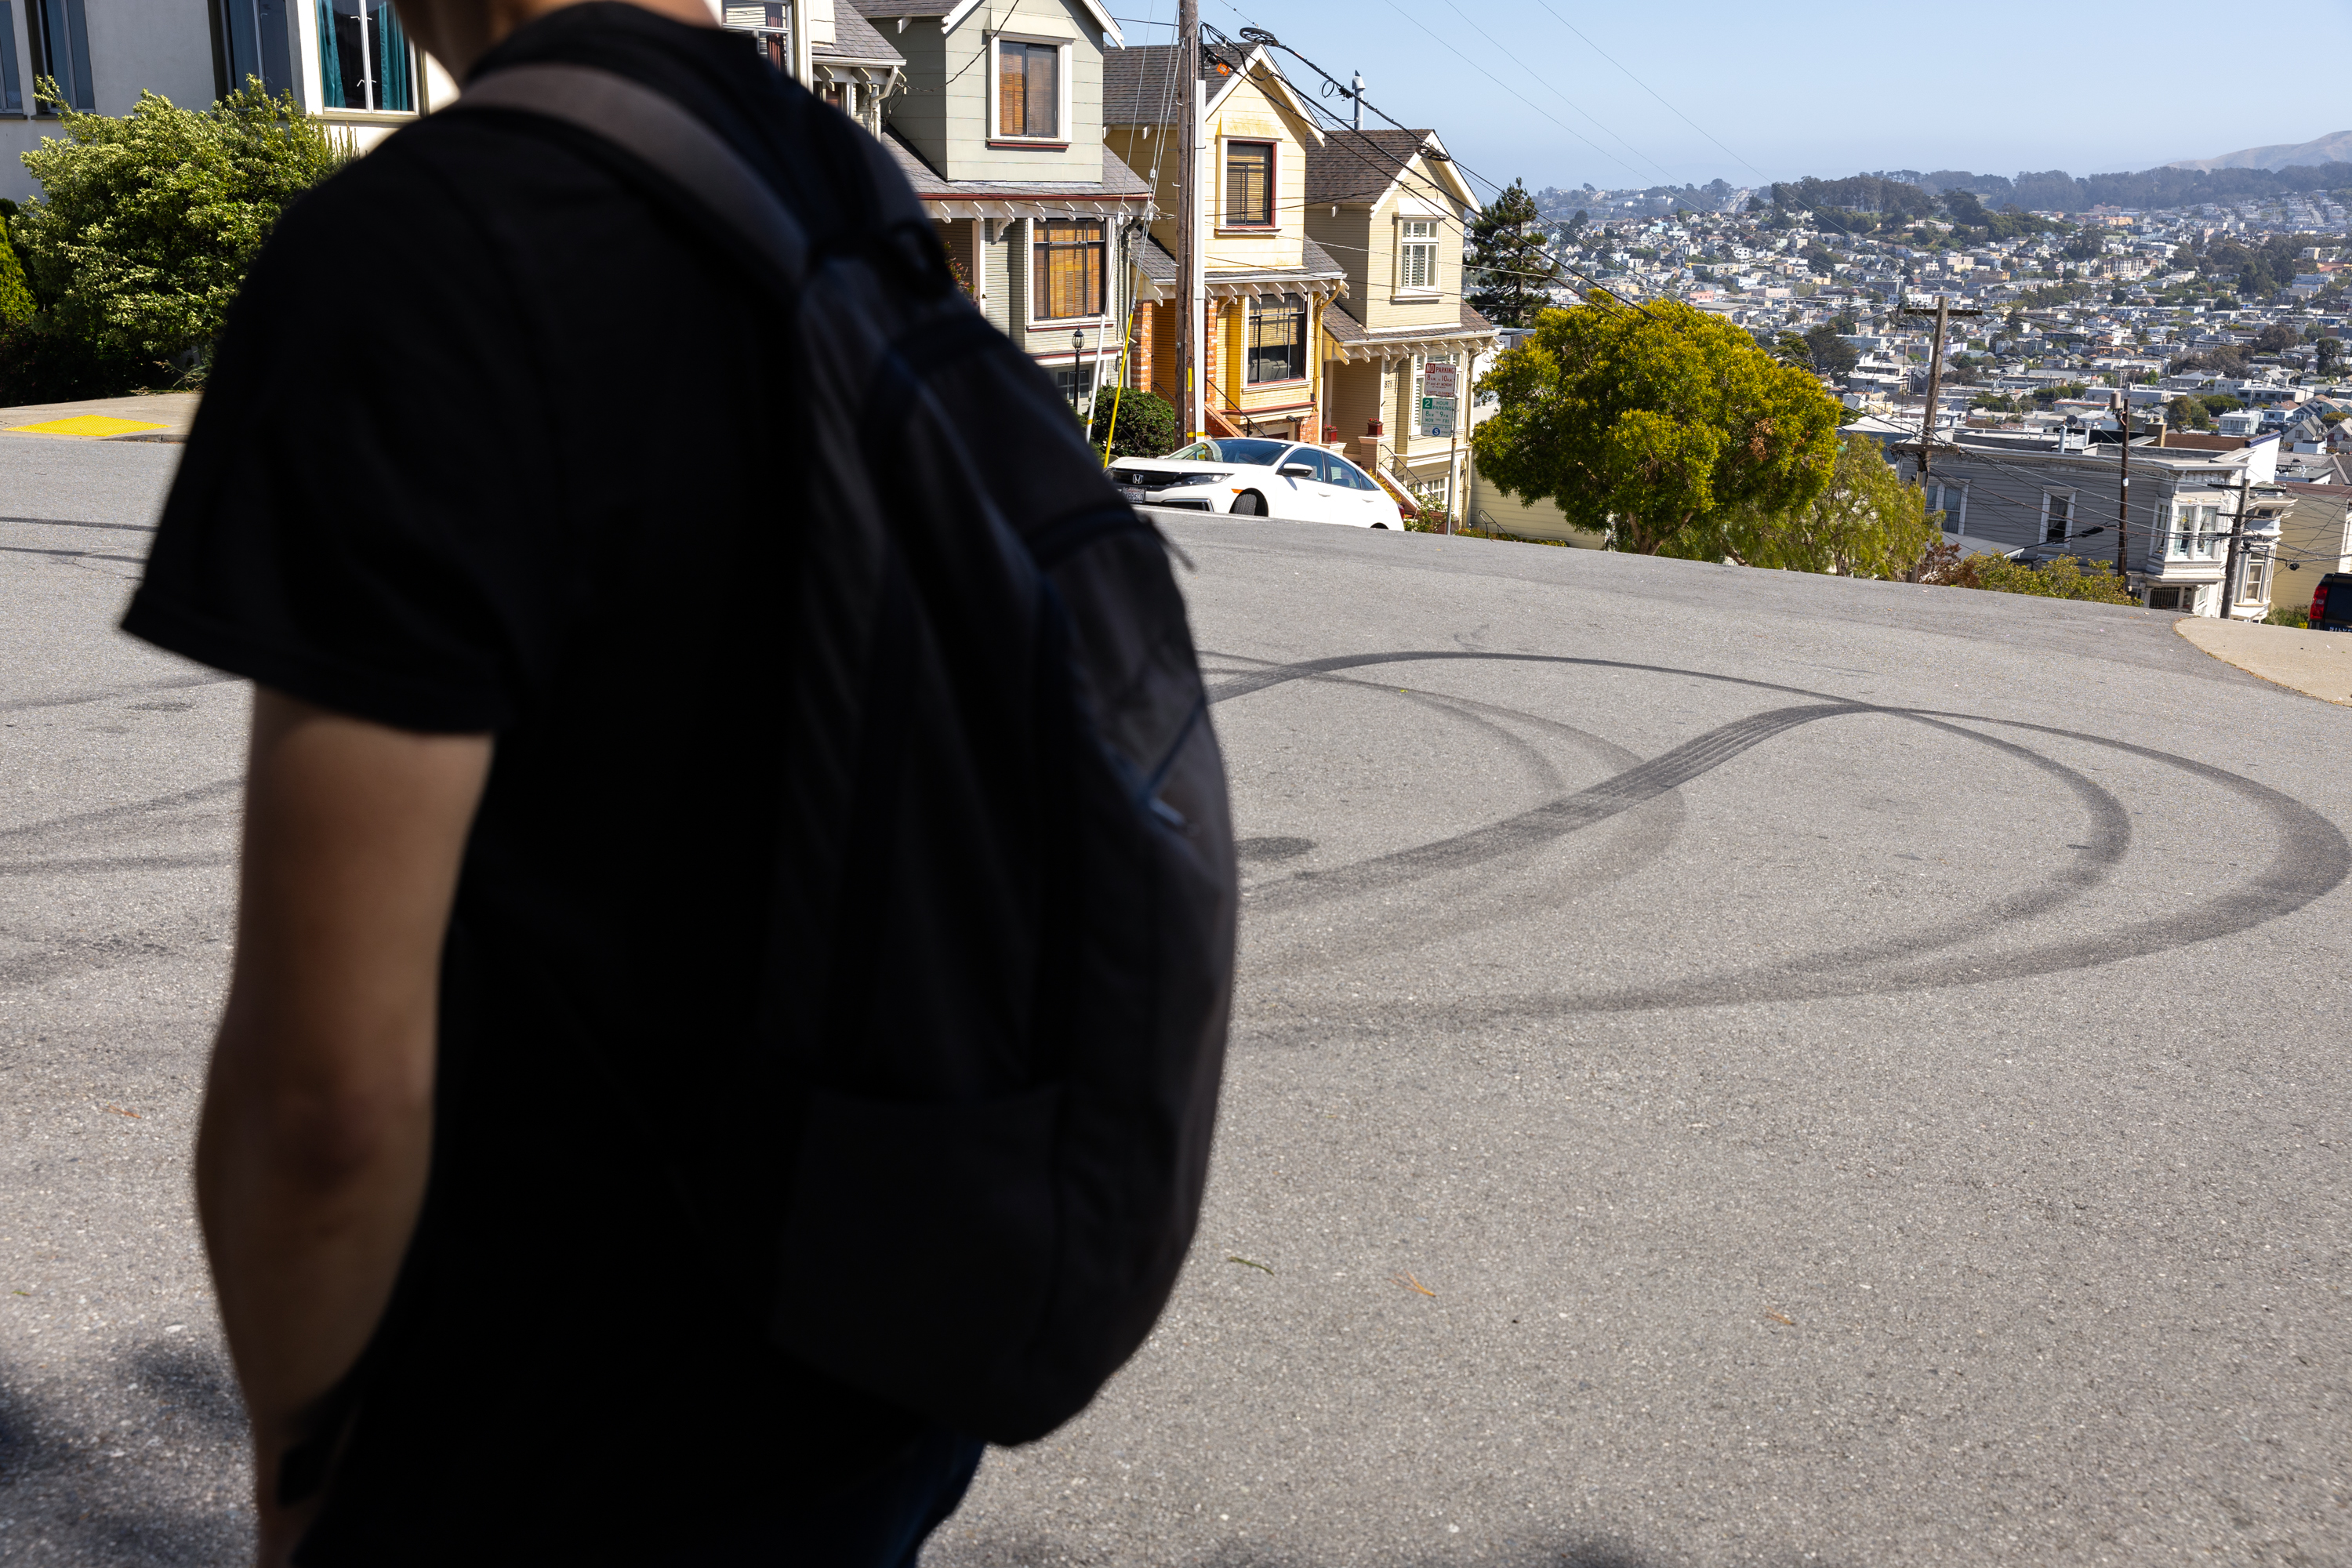 A man wearing a backpack walks next to a street with skid marks.